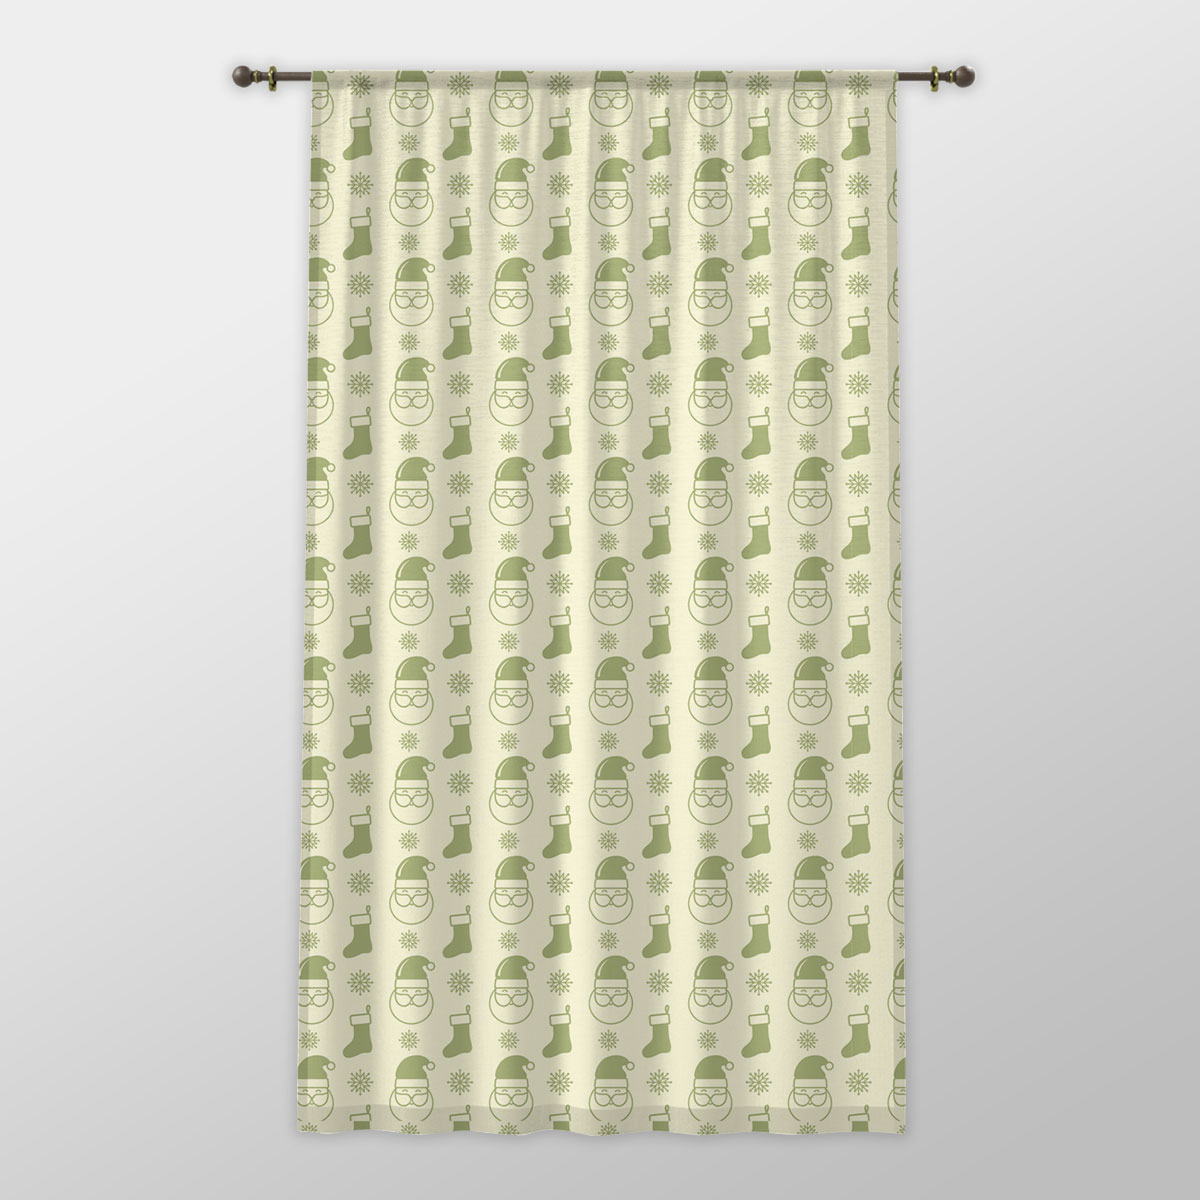 Green And Yellow Santa Clause, Christmas Socks On Snowflake Background One-side Printed Window Curtain